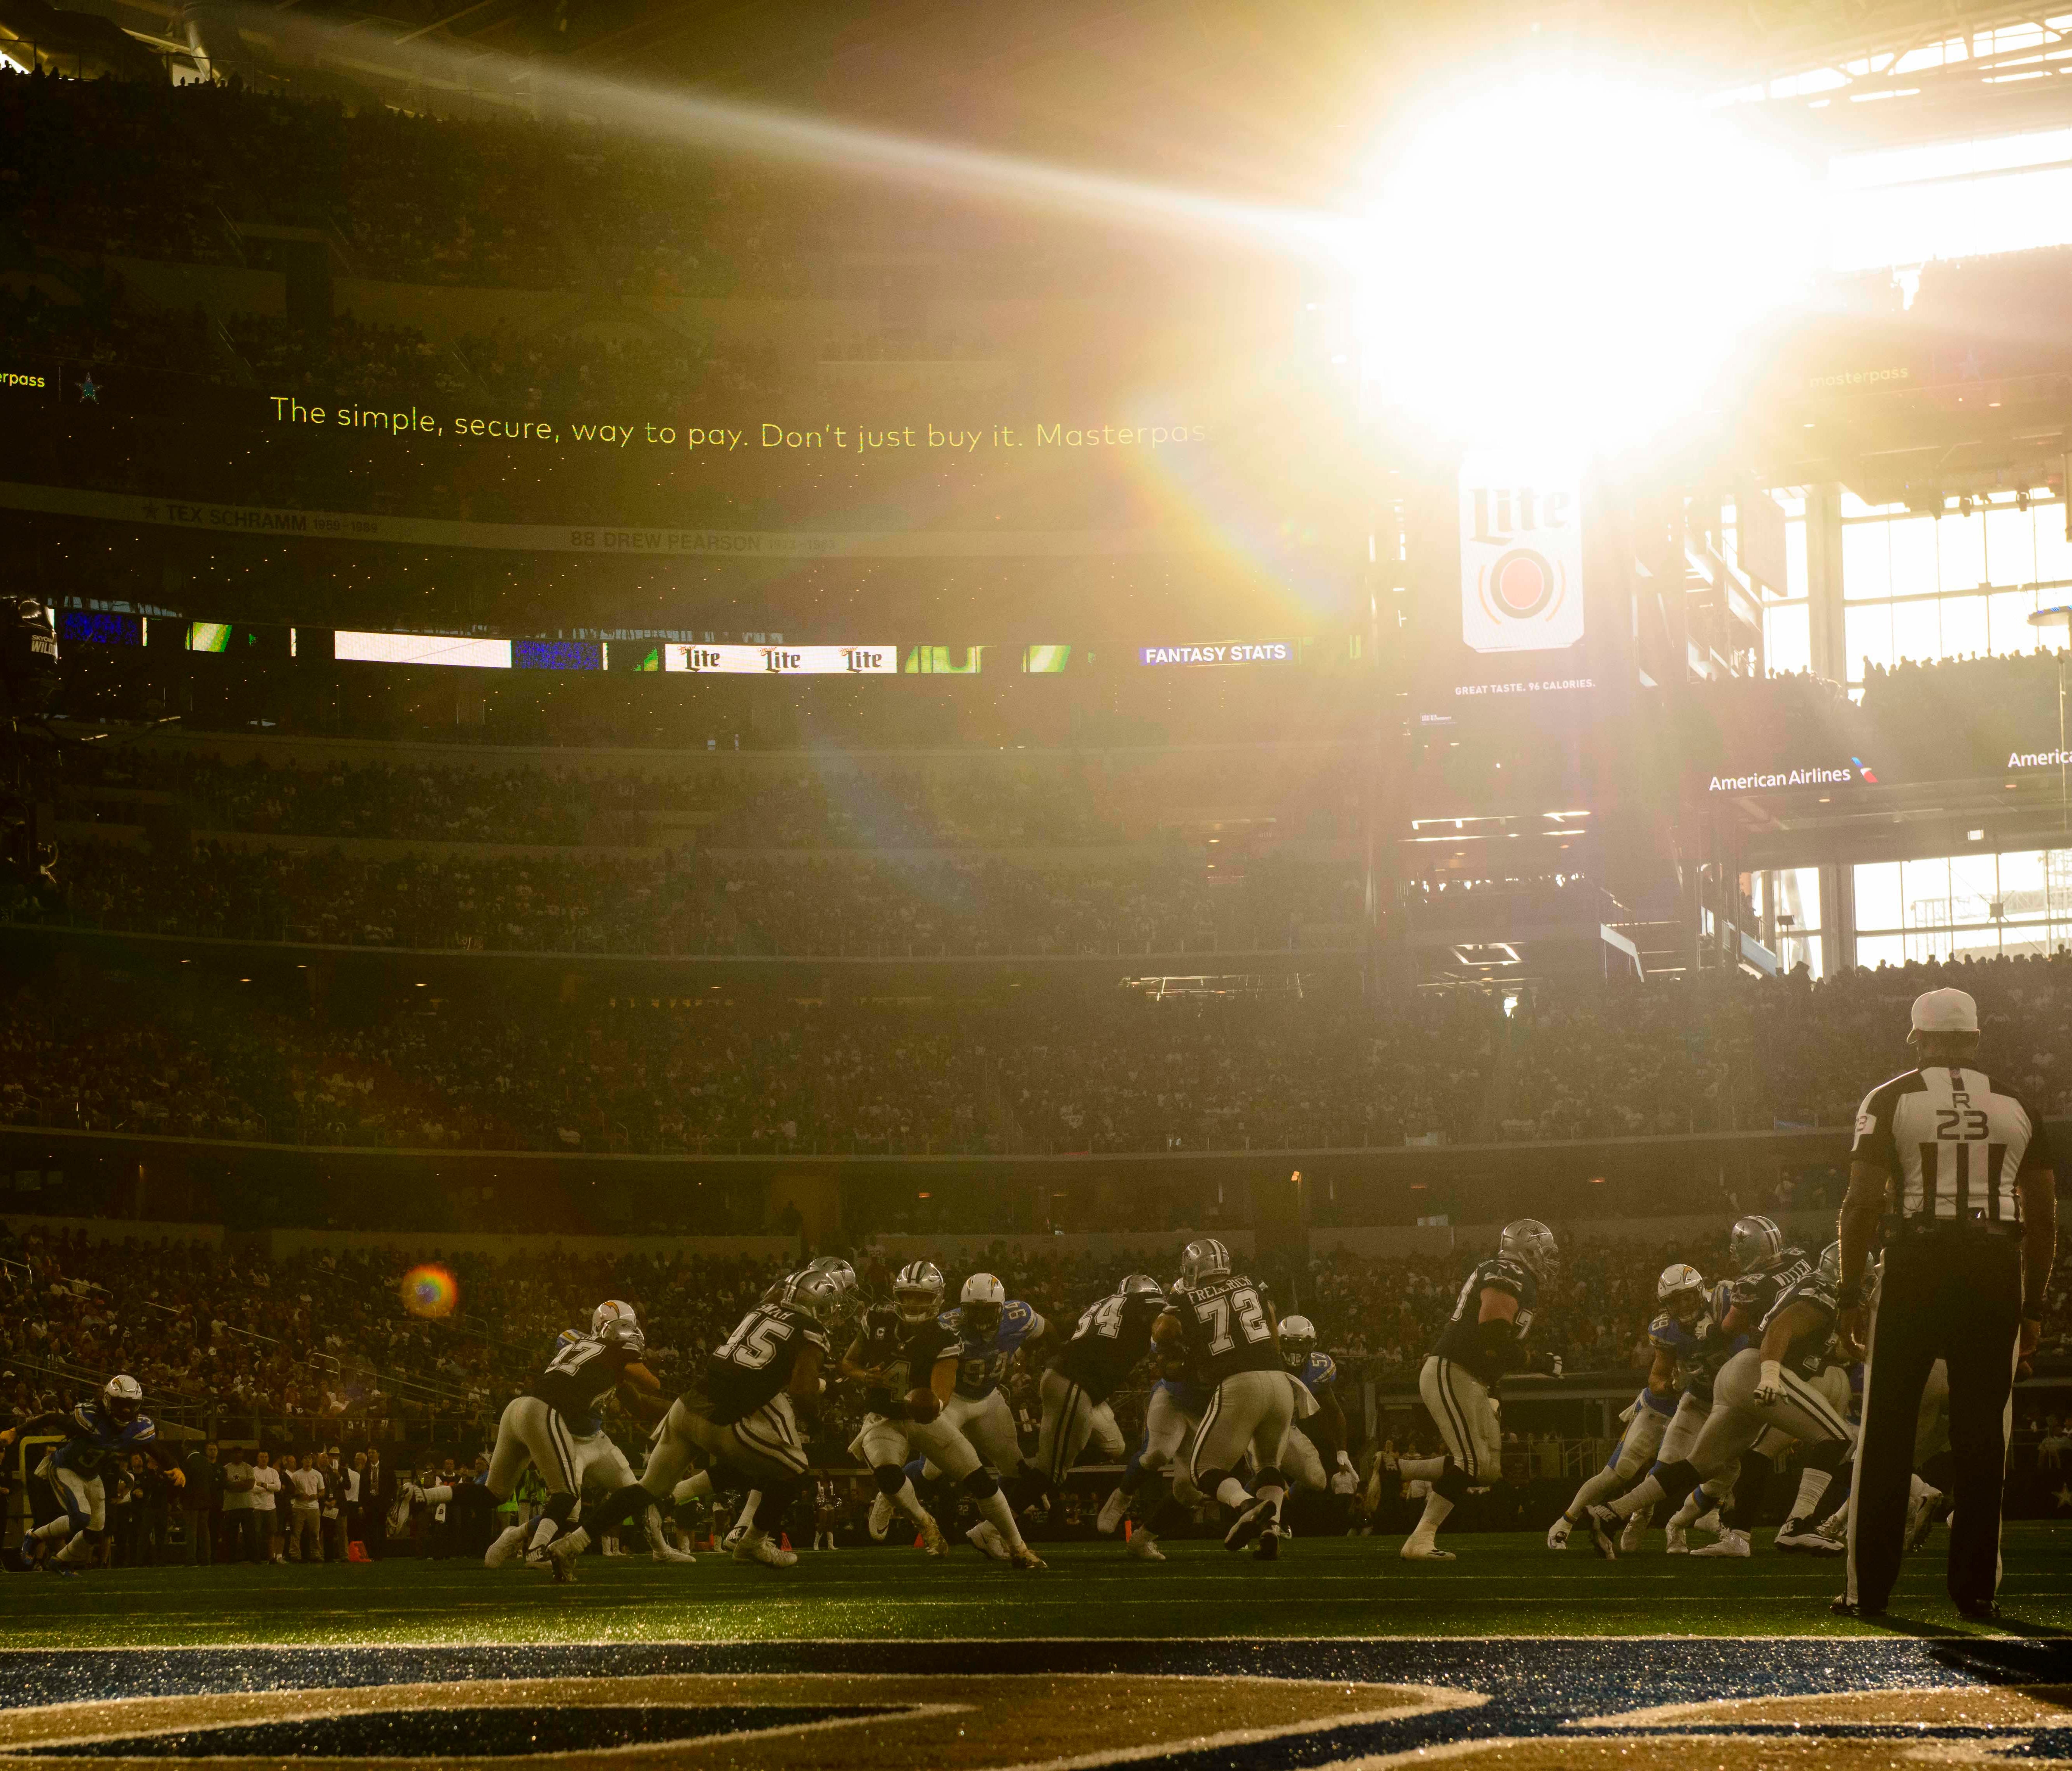 Millions of Dish Network customers were unable to watch the Chargers-Cowboys Thanksgiving Day game televised by CBS.